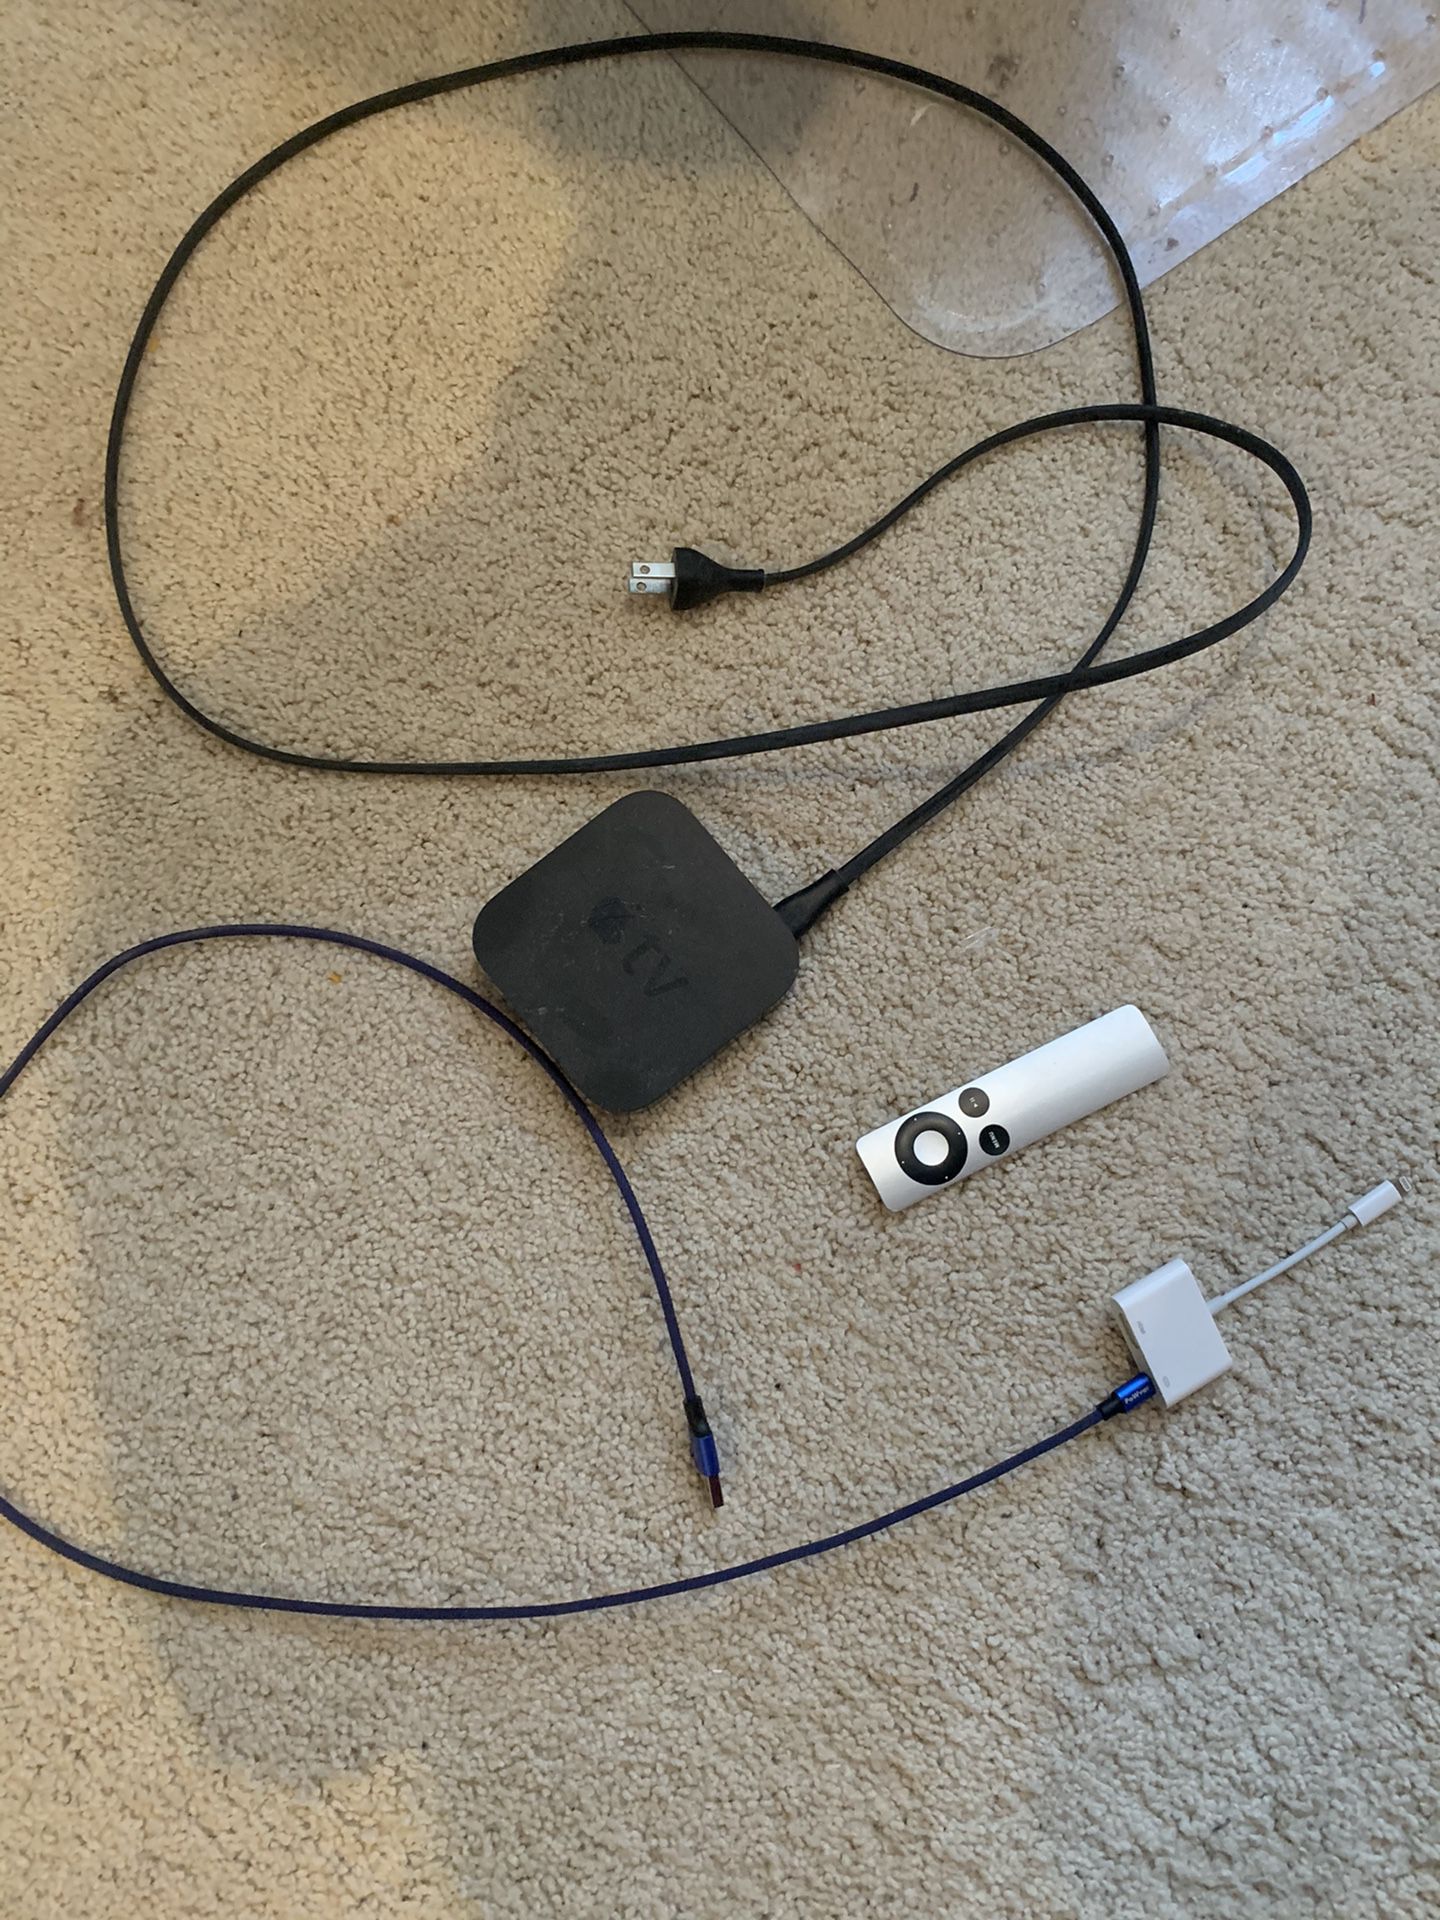 Apple tv w/ phone and usb connector